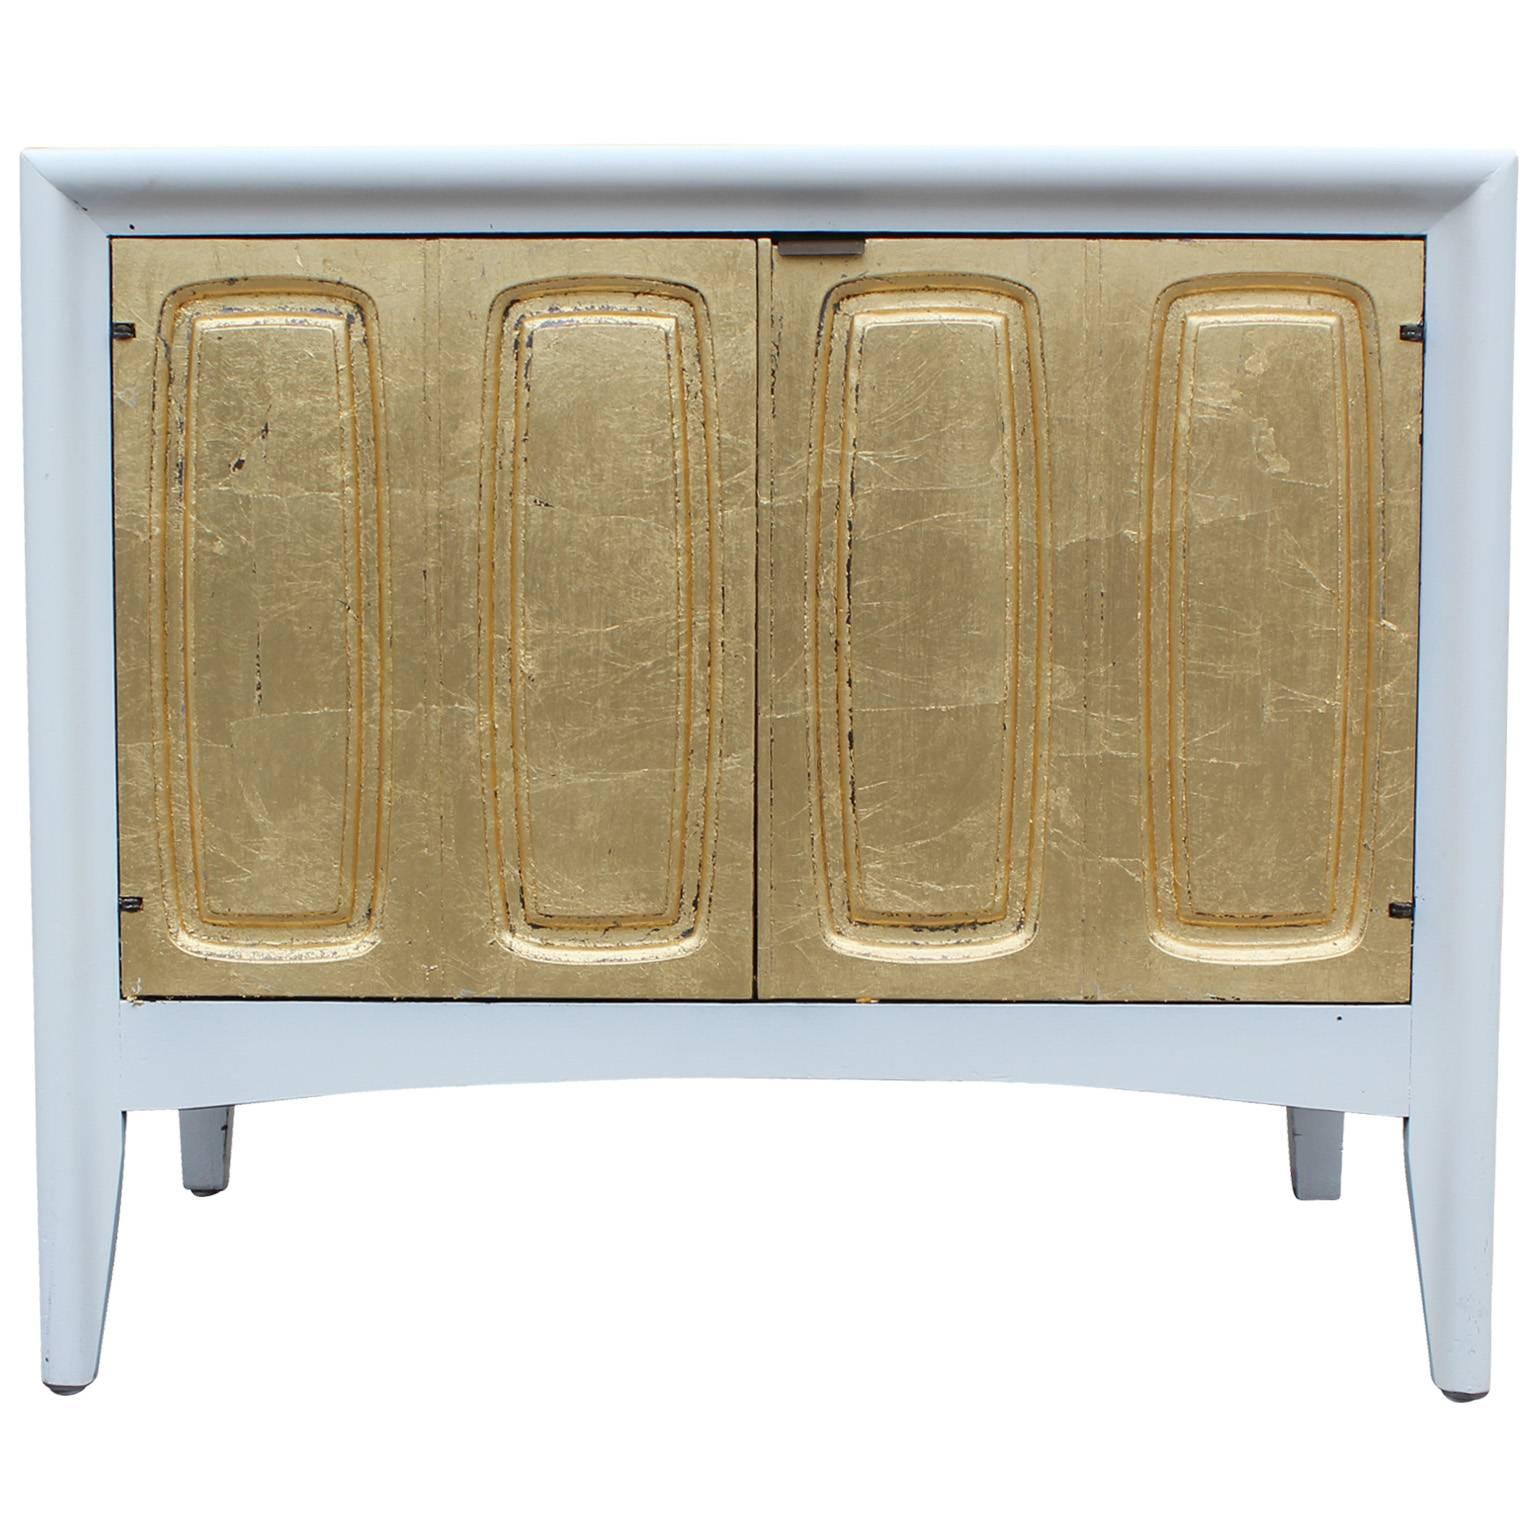 Dramatic pair of night stands or side tables. Cases are finished in a satiny white lacquer. Drawer fronts are covered in a textured gold leaf finish. Two doors open to cabinet space.